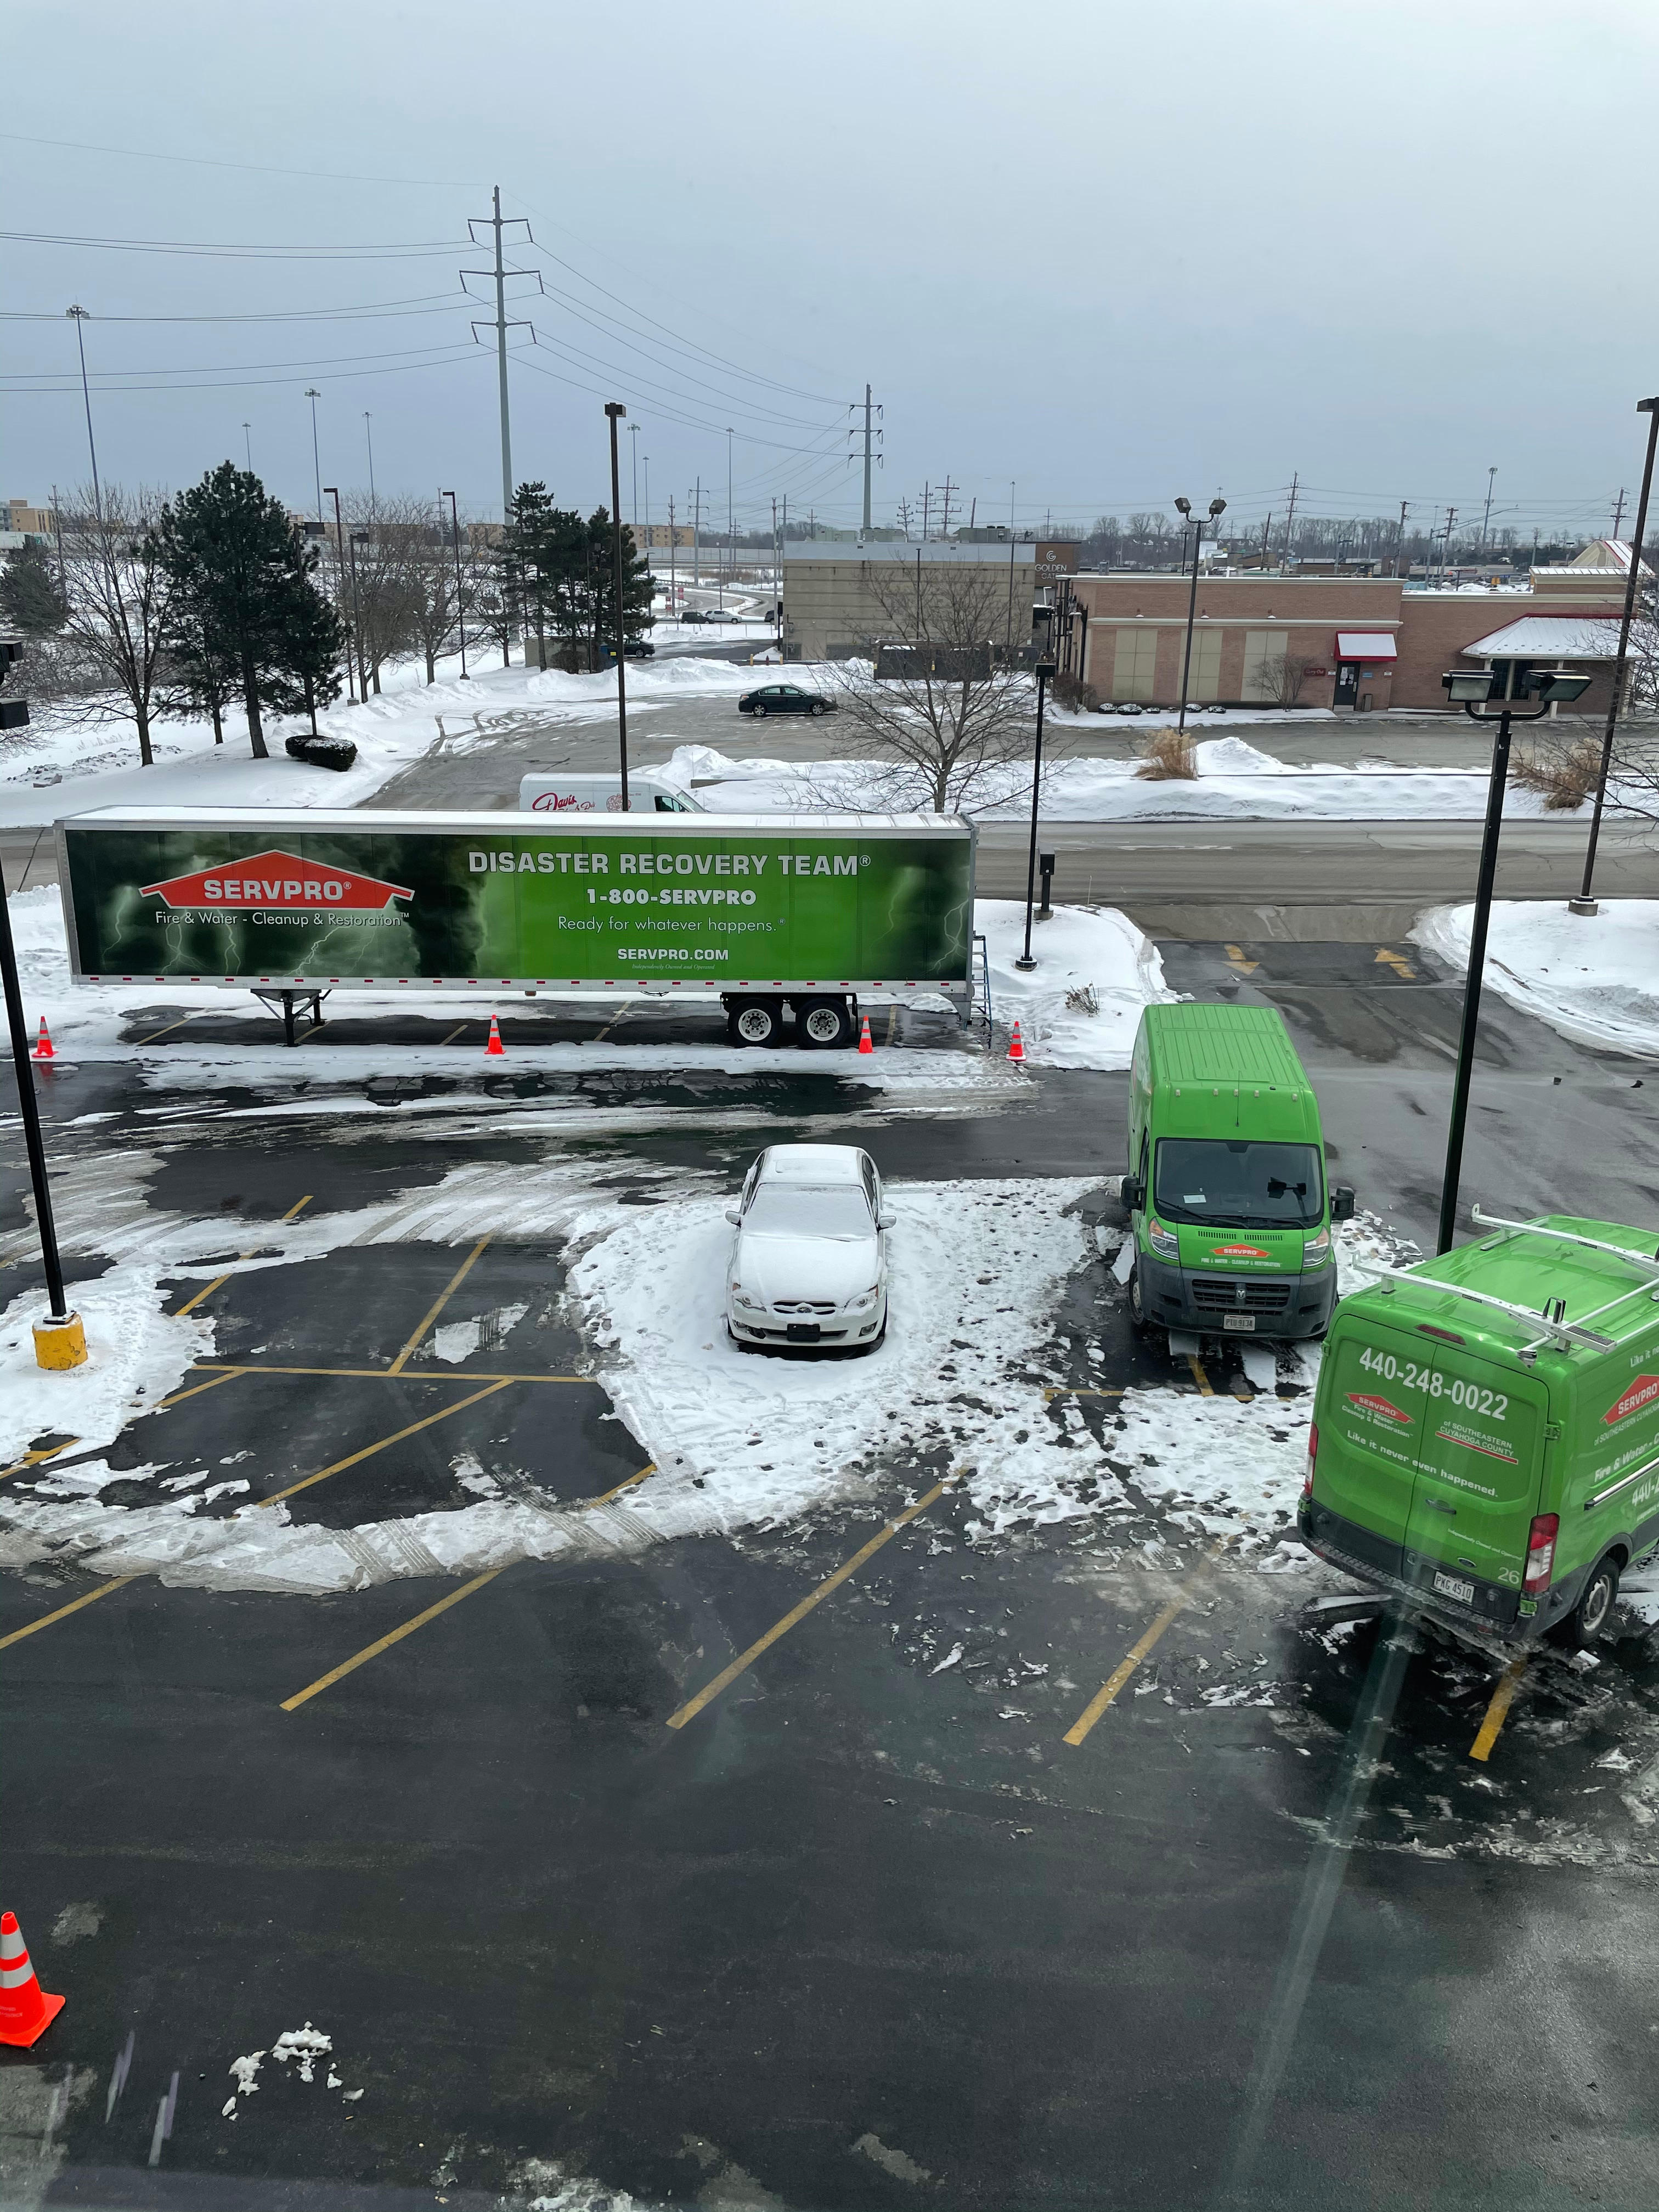 No matter the weather, we're there to help you!